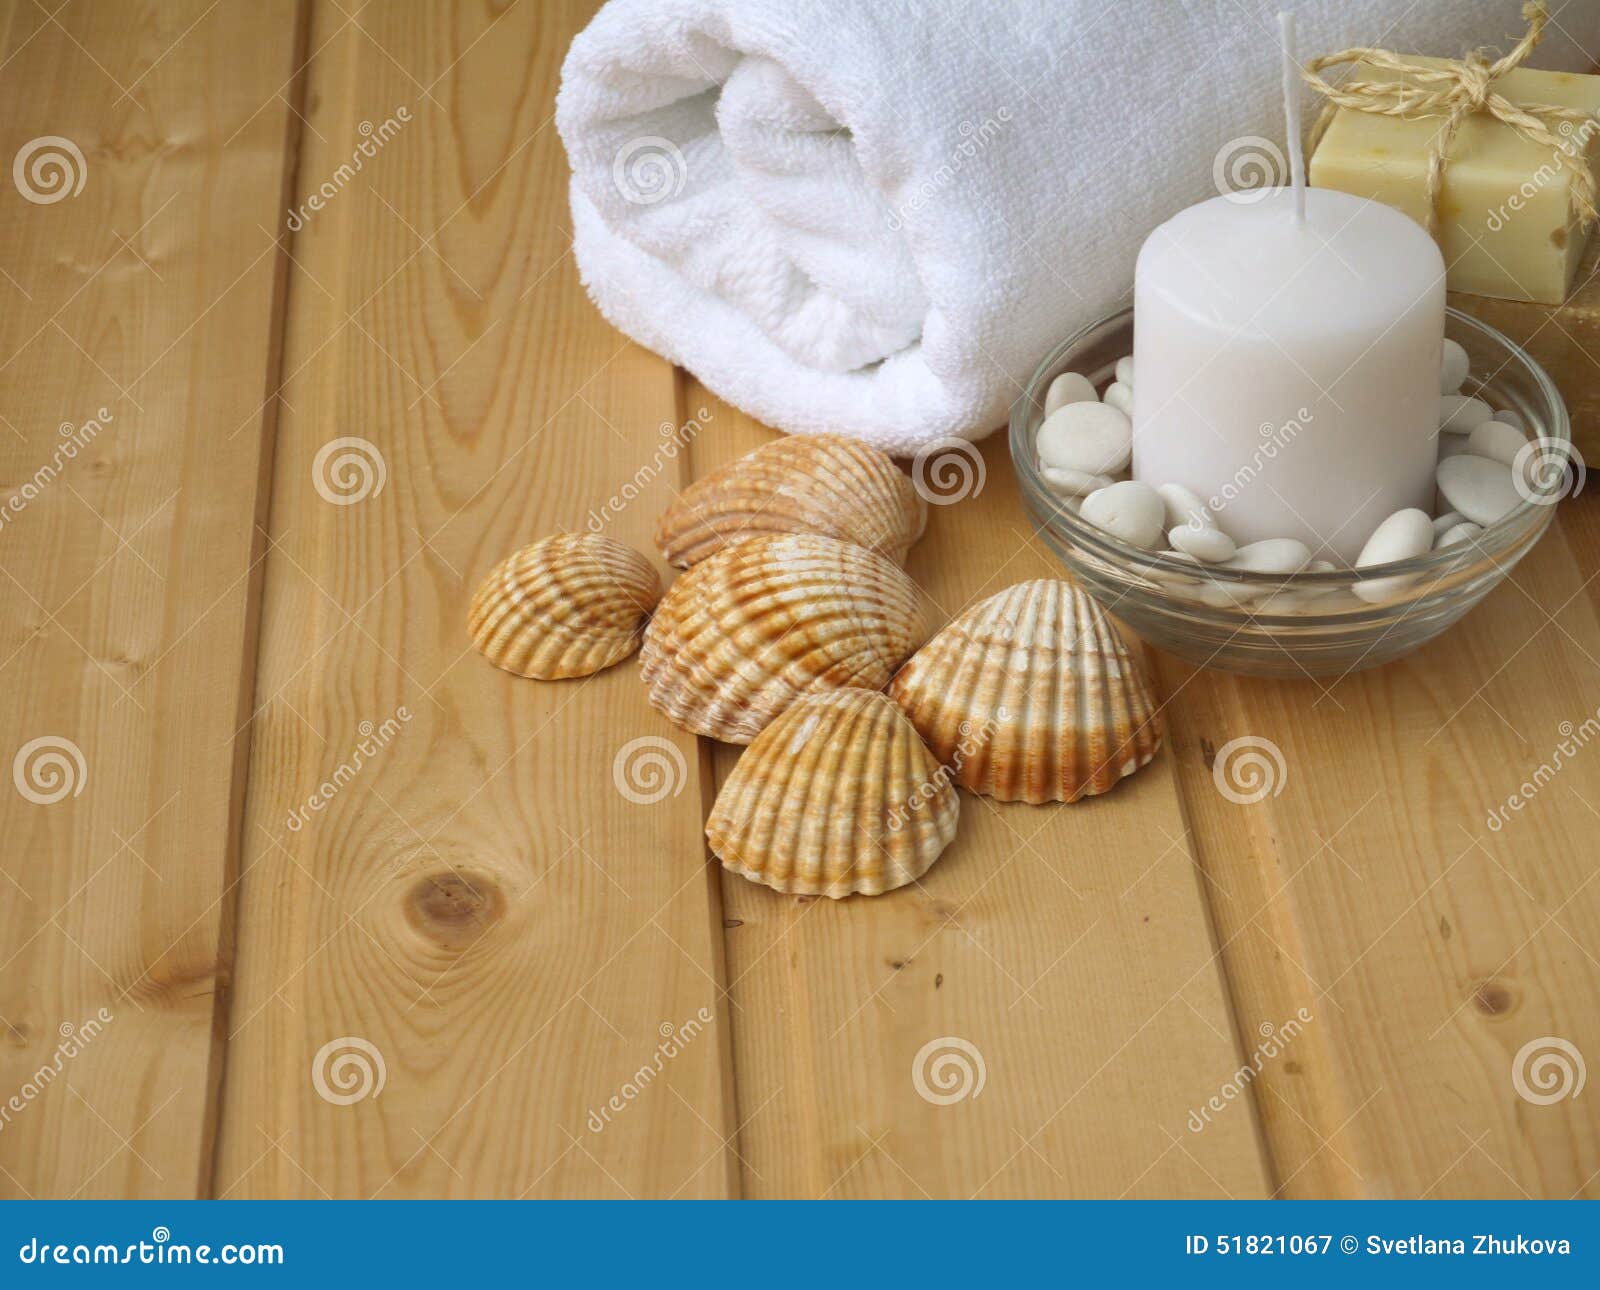 Towel,soap,candle and shells on the wooden background